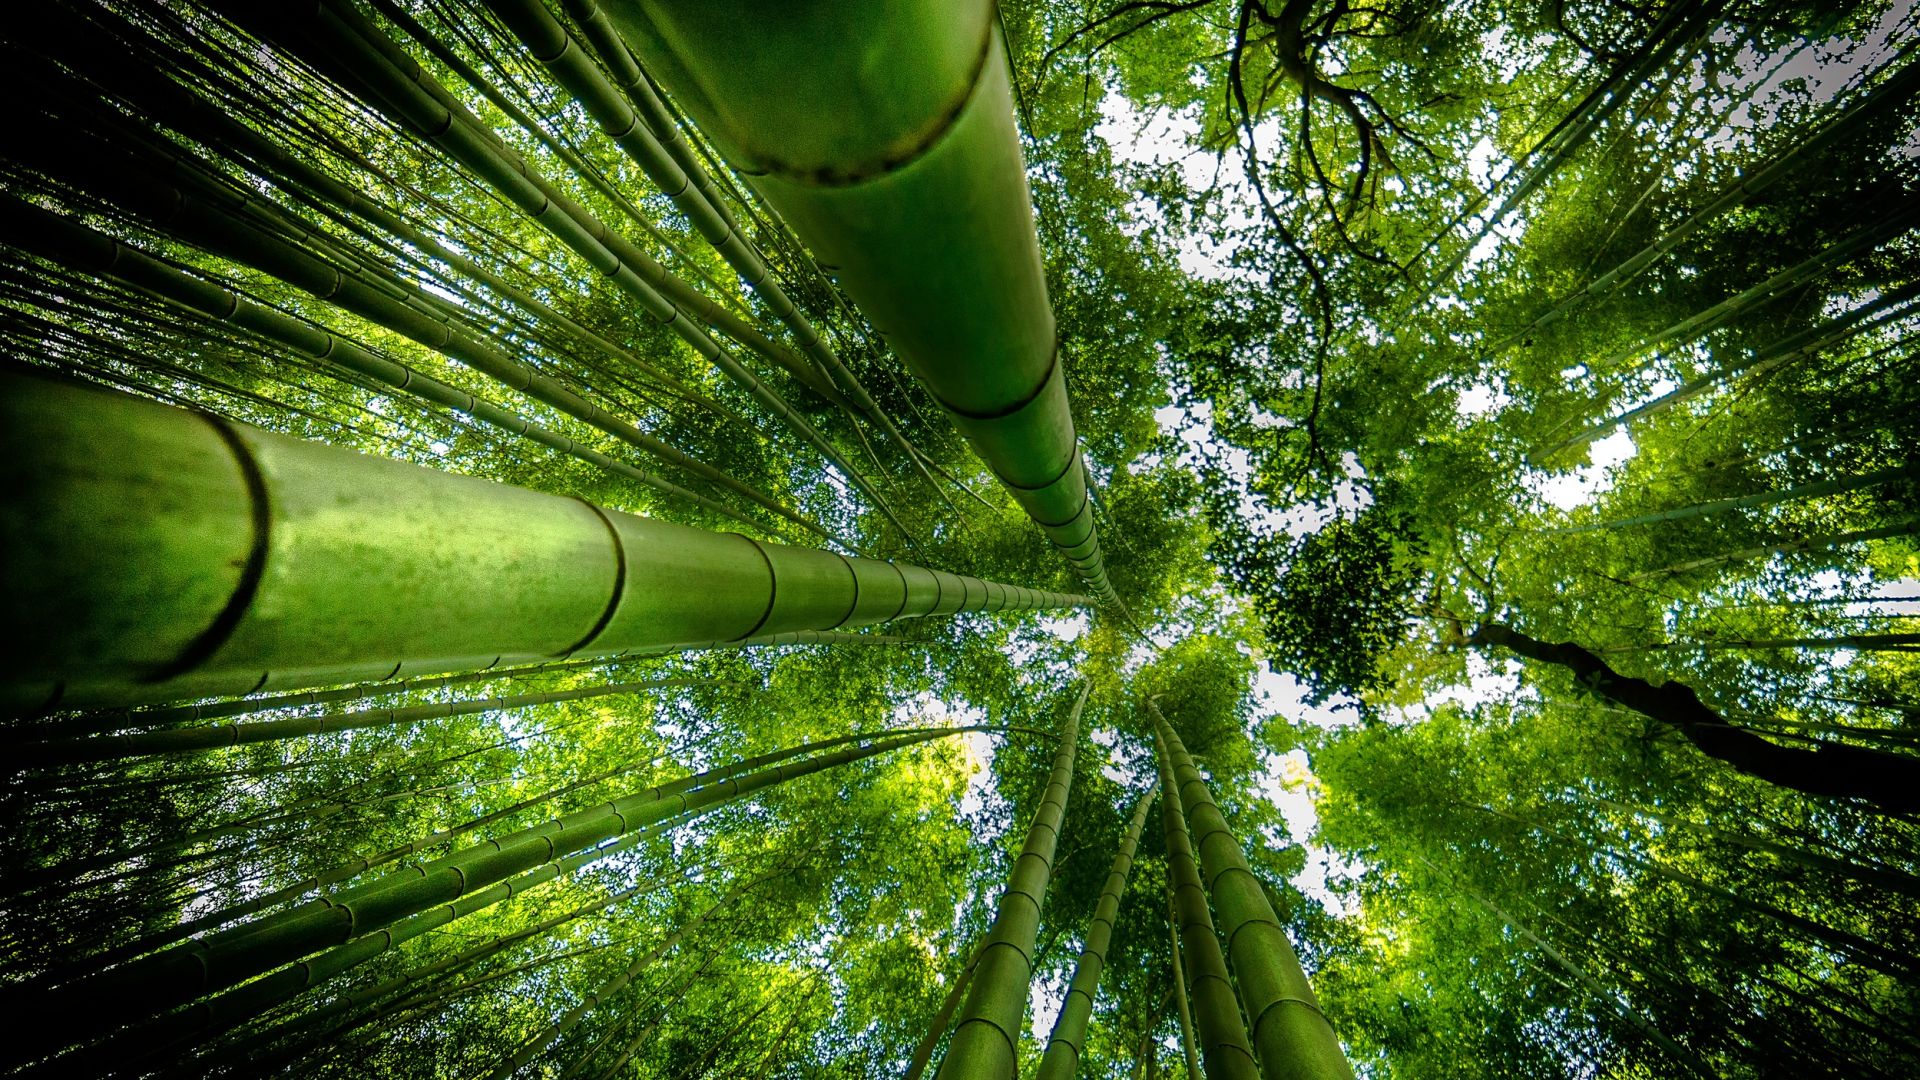 Desktop Wallpaper Bamboo Forest, HD Image, Picture, Background, 7zik F